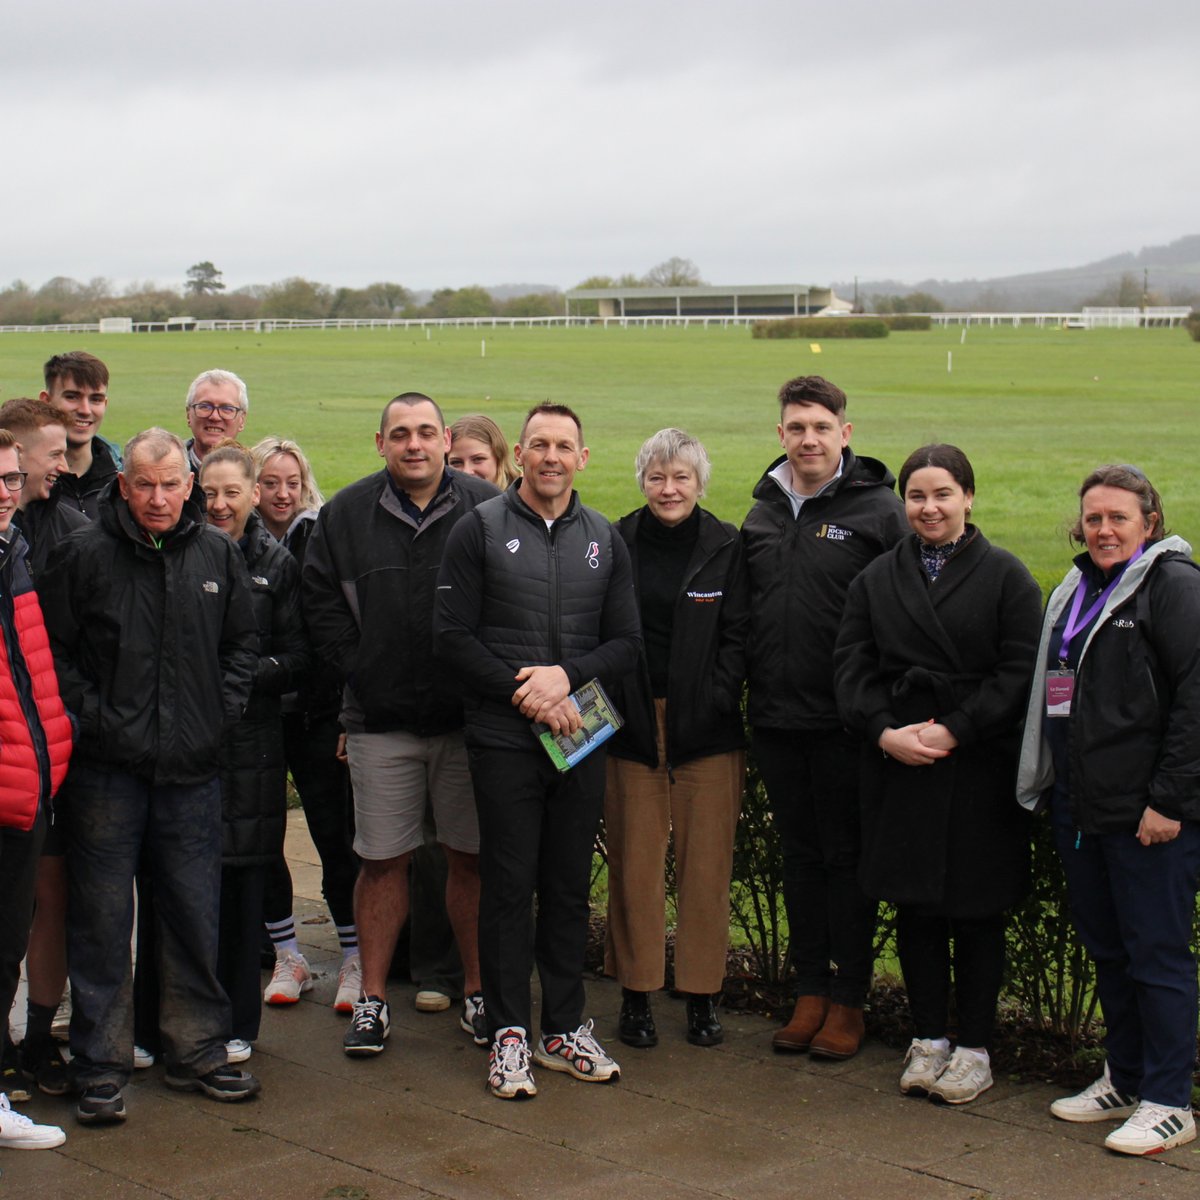 We had a fantastic open morning at the Golf Course with Wincanton's Freedom Leisure Centre Team!